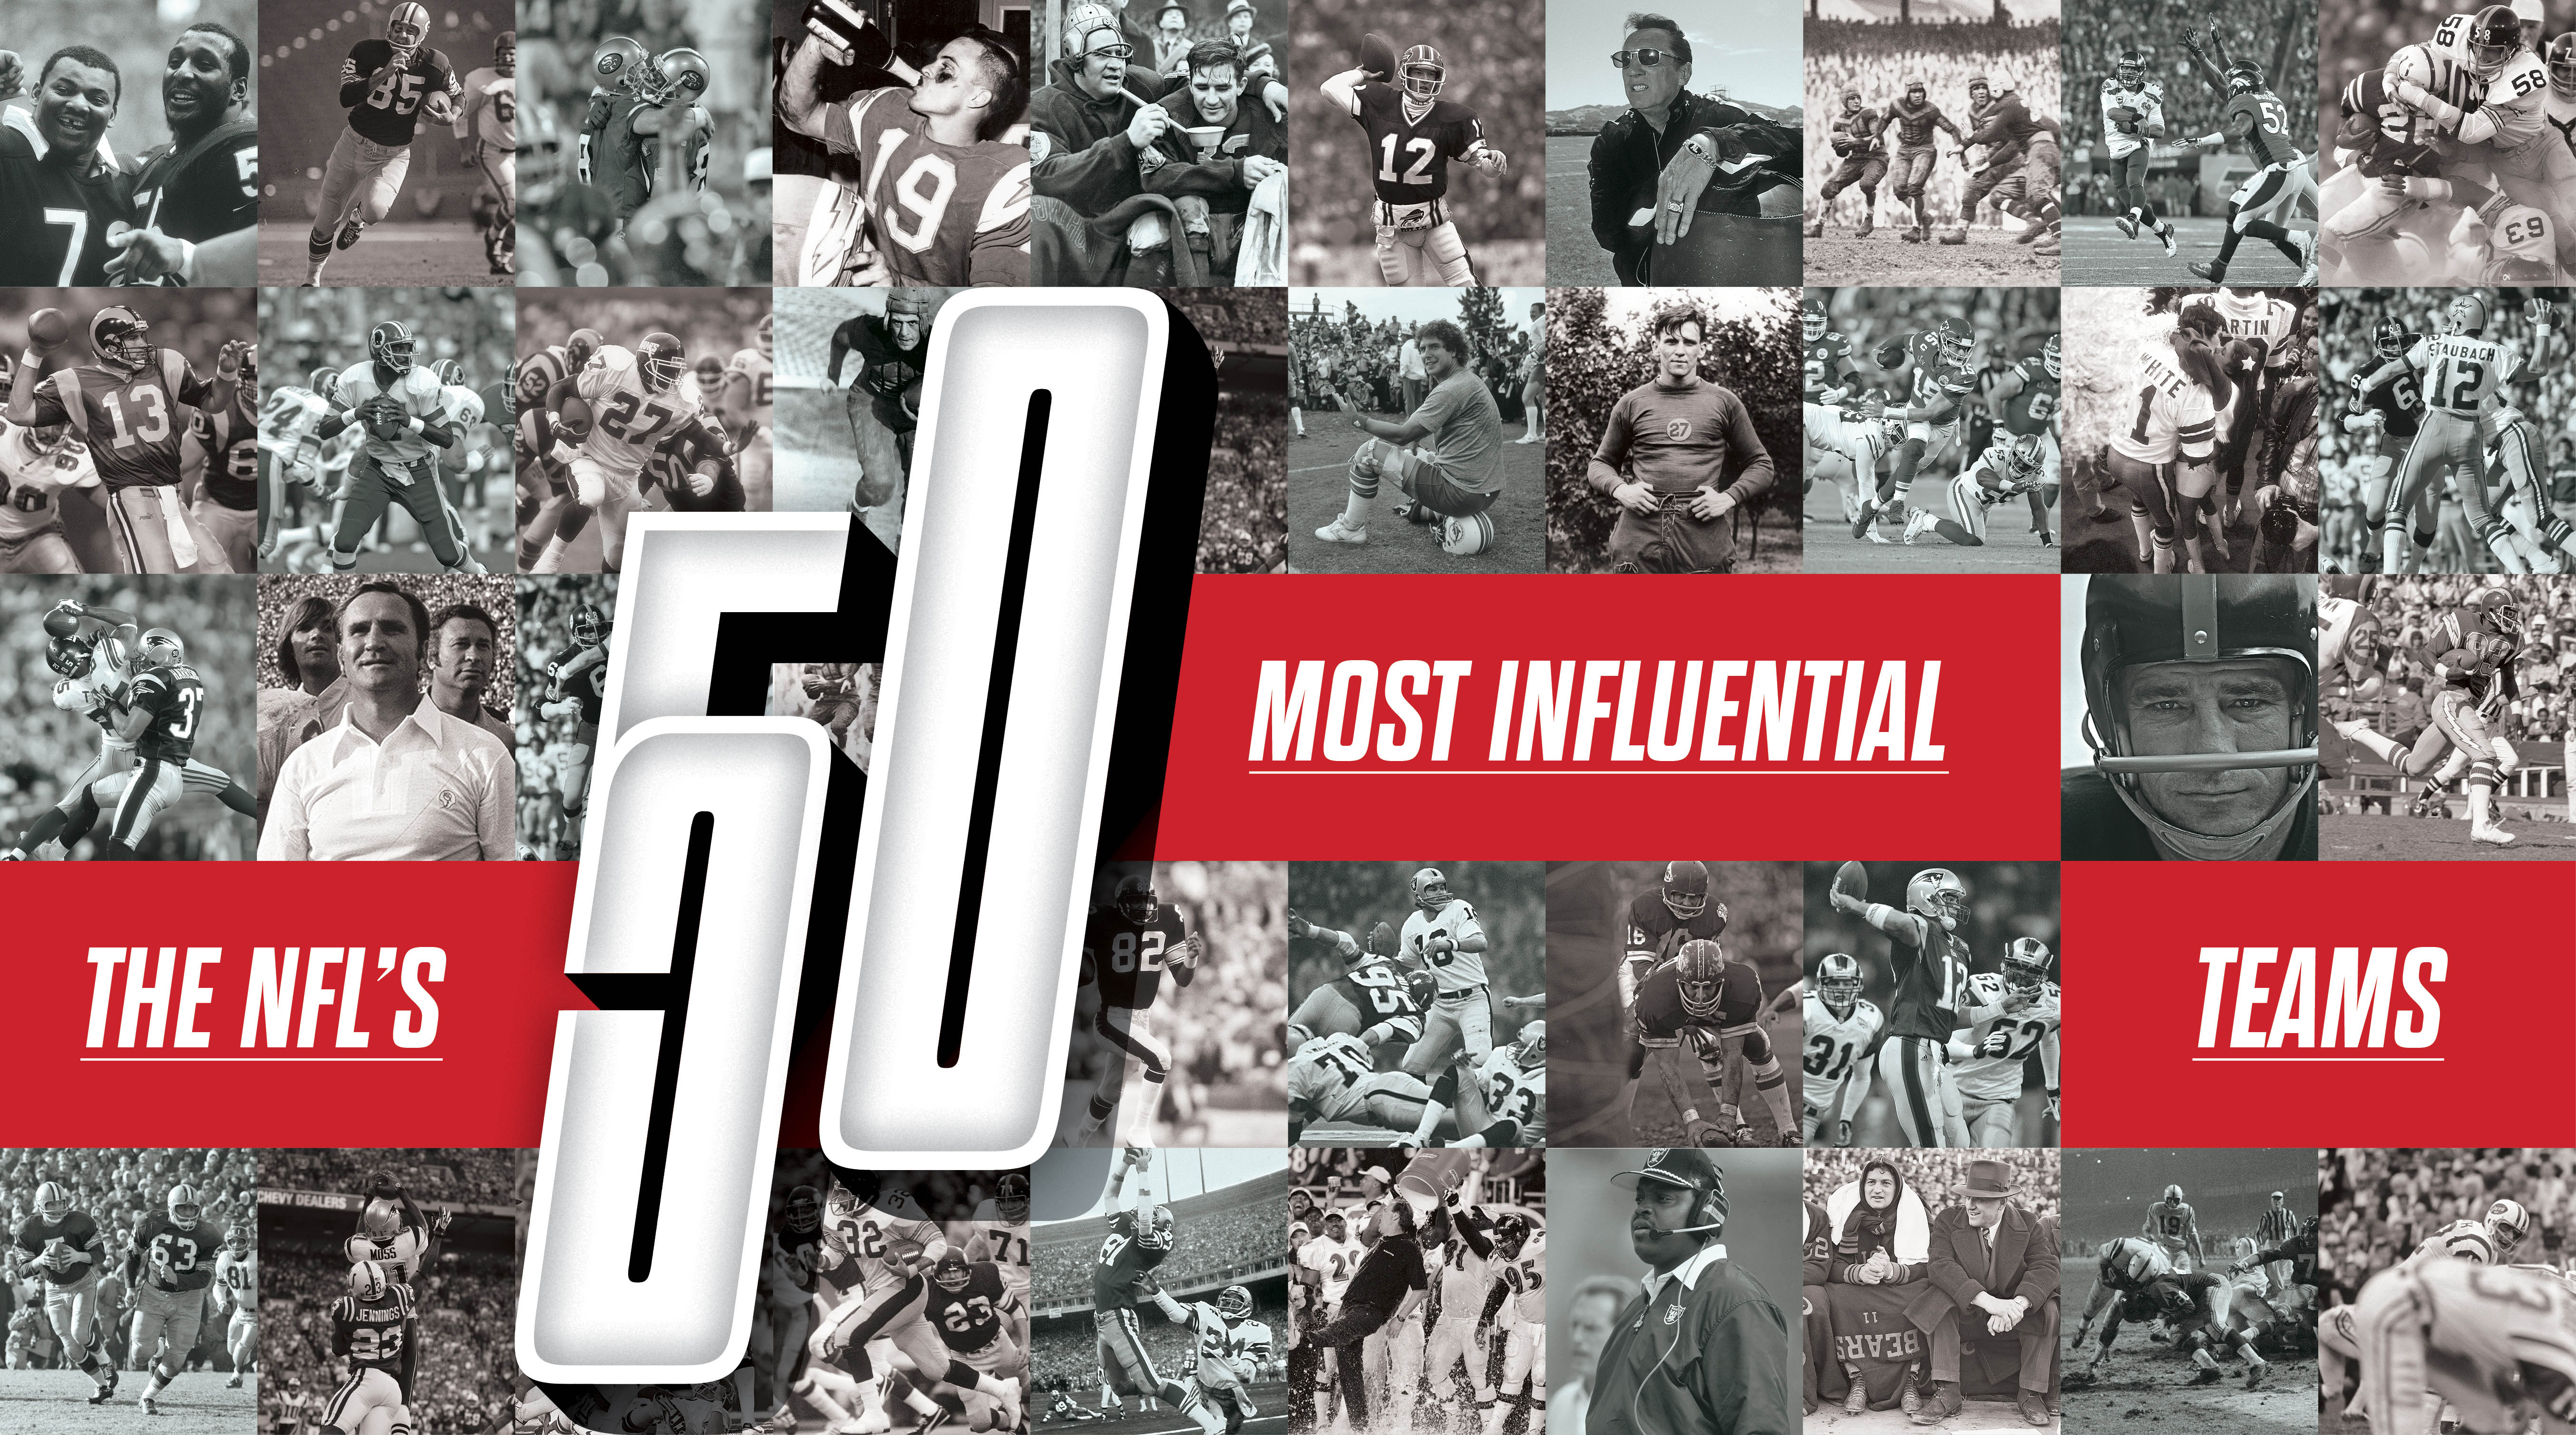 The NFL’s 50 Most Influential Teams text overlayed a collage of black and white football photos